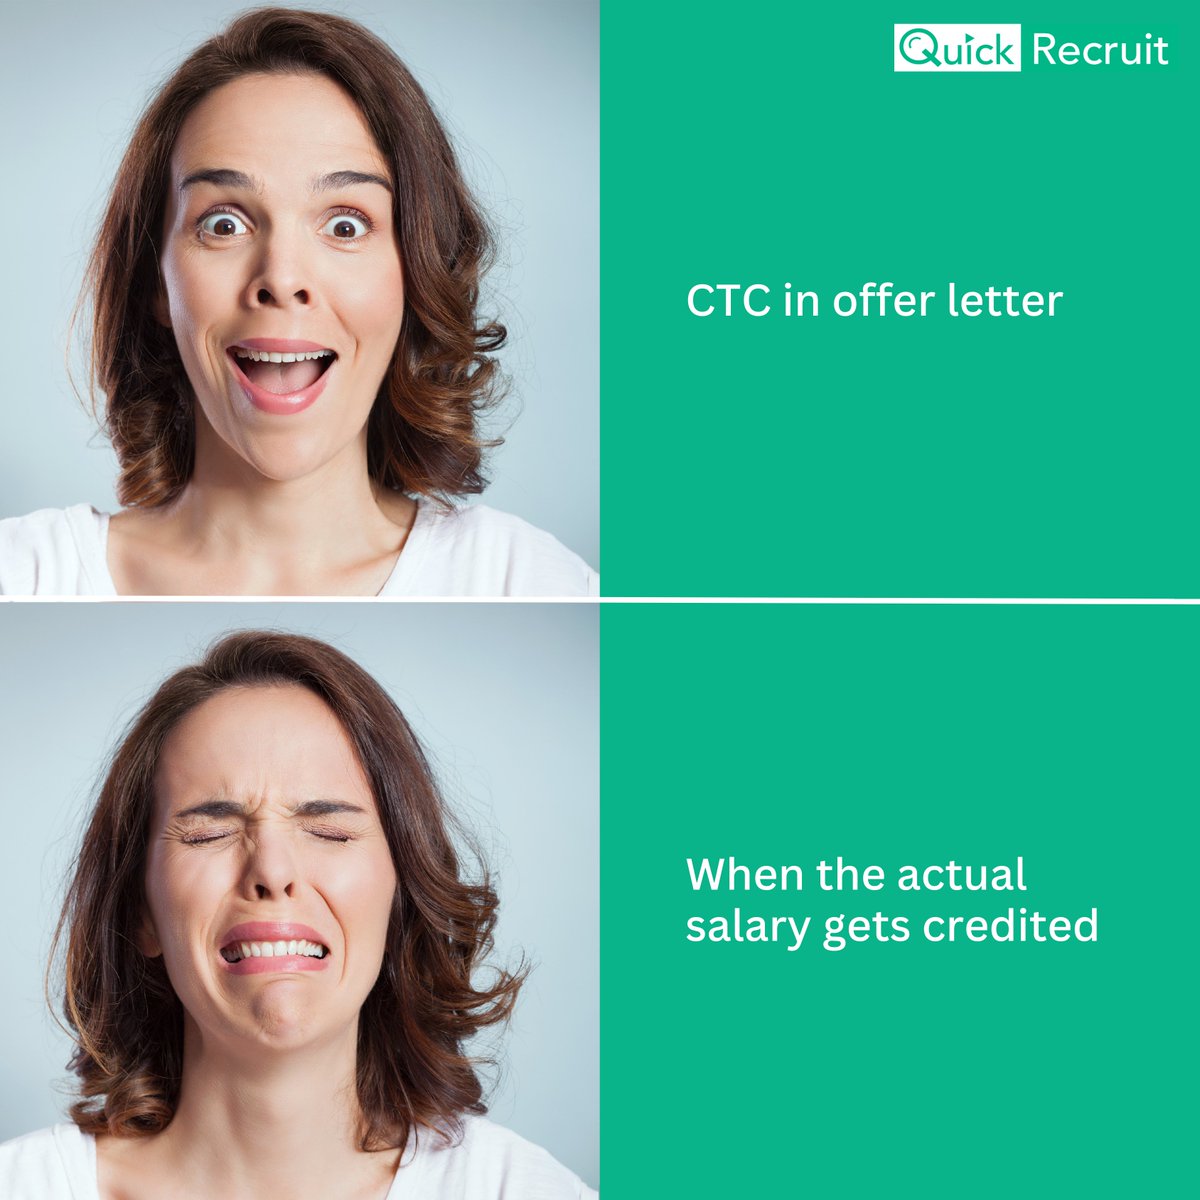 Ever felt the gap between what's promised and what you receive?
Before your salary received your account, check: 
1)Components
2)Deductions
3)Payroll Errors
4)Compliance
5)Documentation
#salarymemes #funnymeme #memesdaily
#interviewasaservice #virtualinterviews #quickrecruit